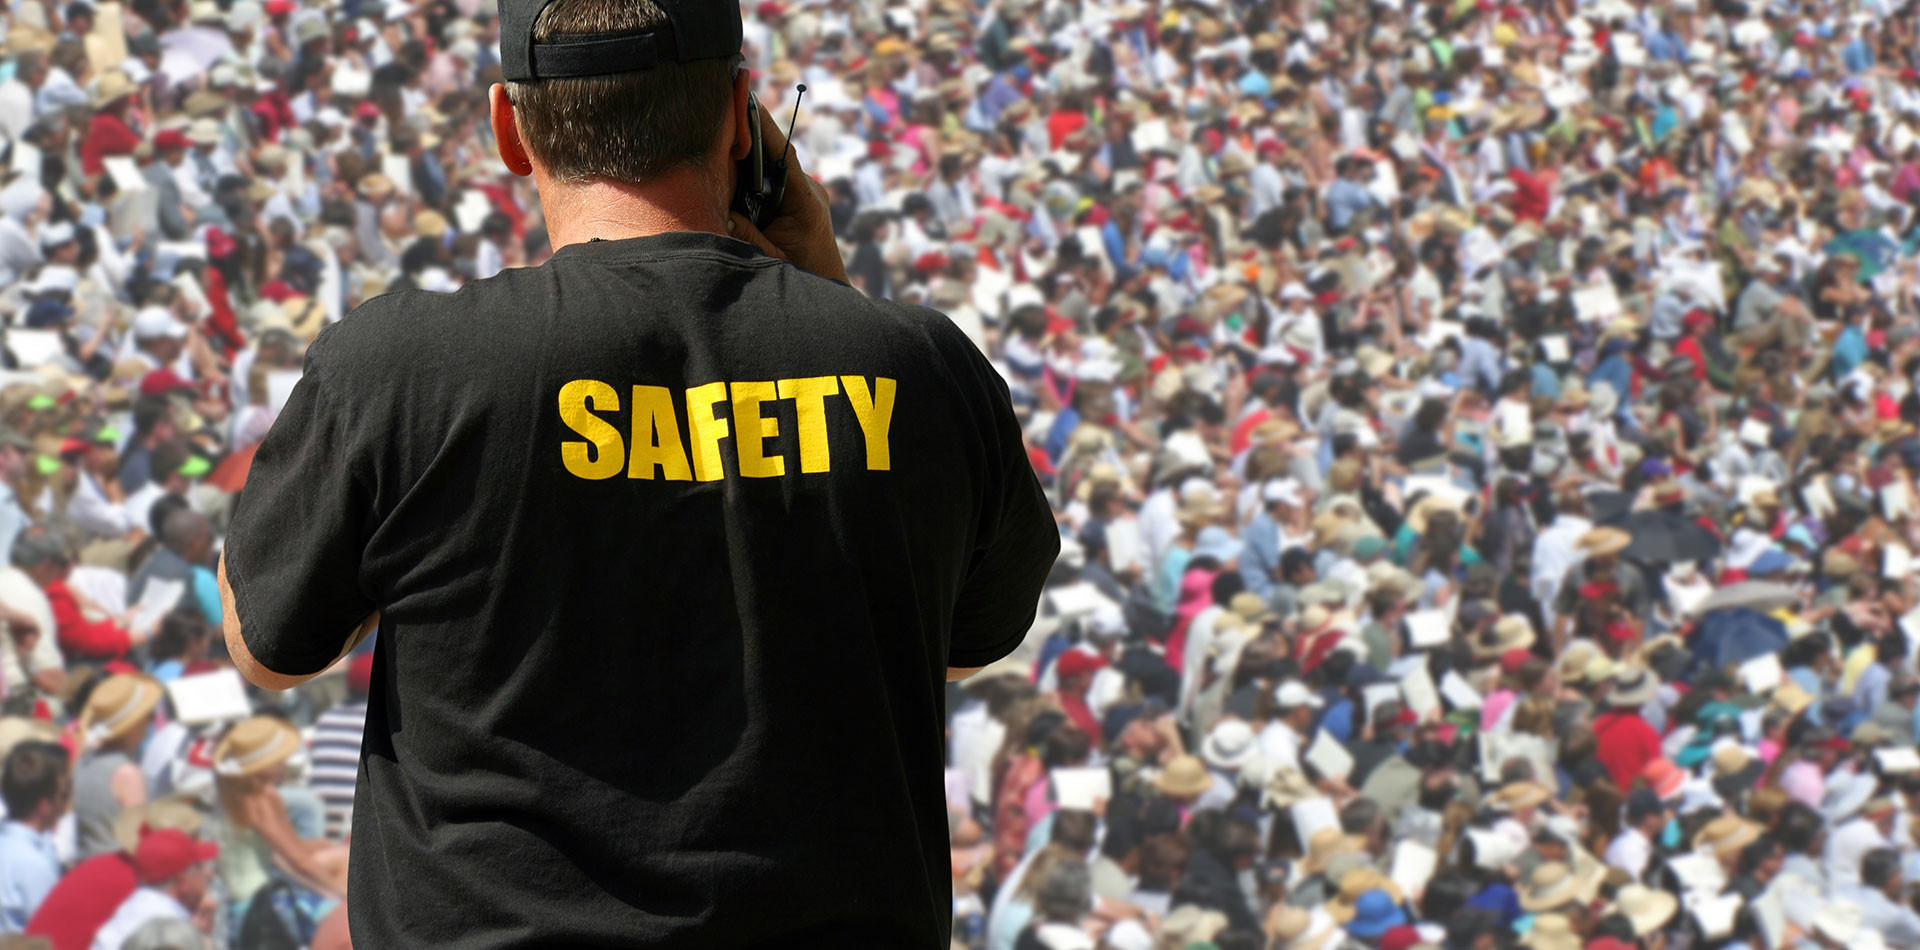 Controlling crowds. Crowd Safety. England event Safety.